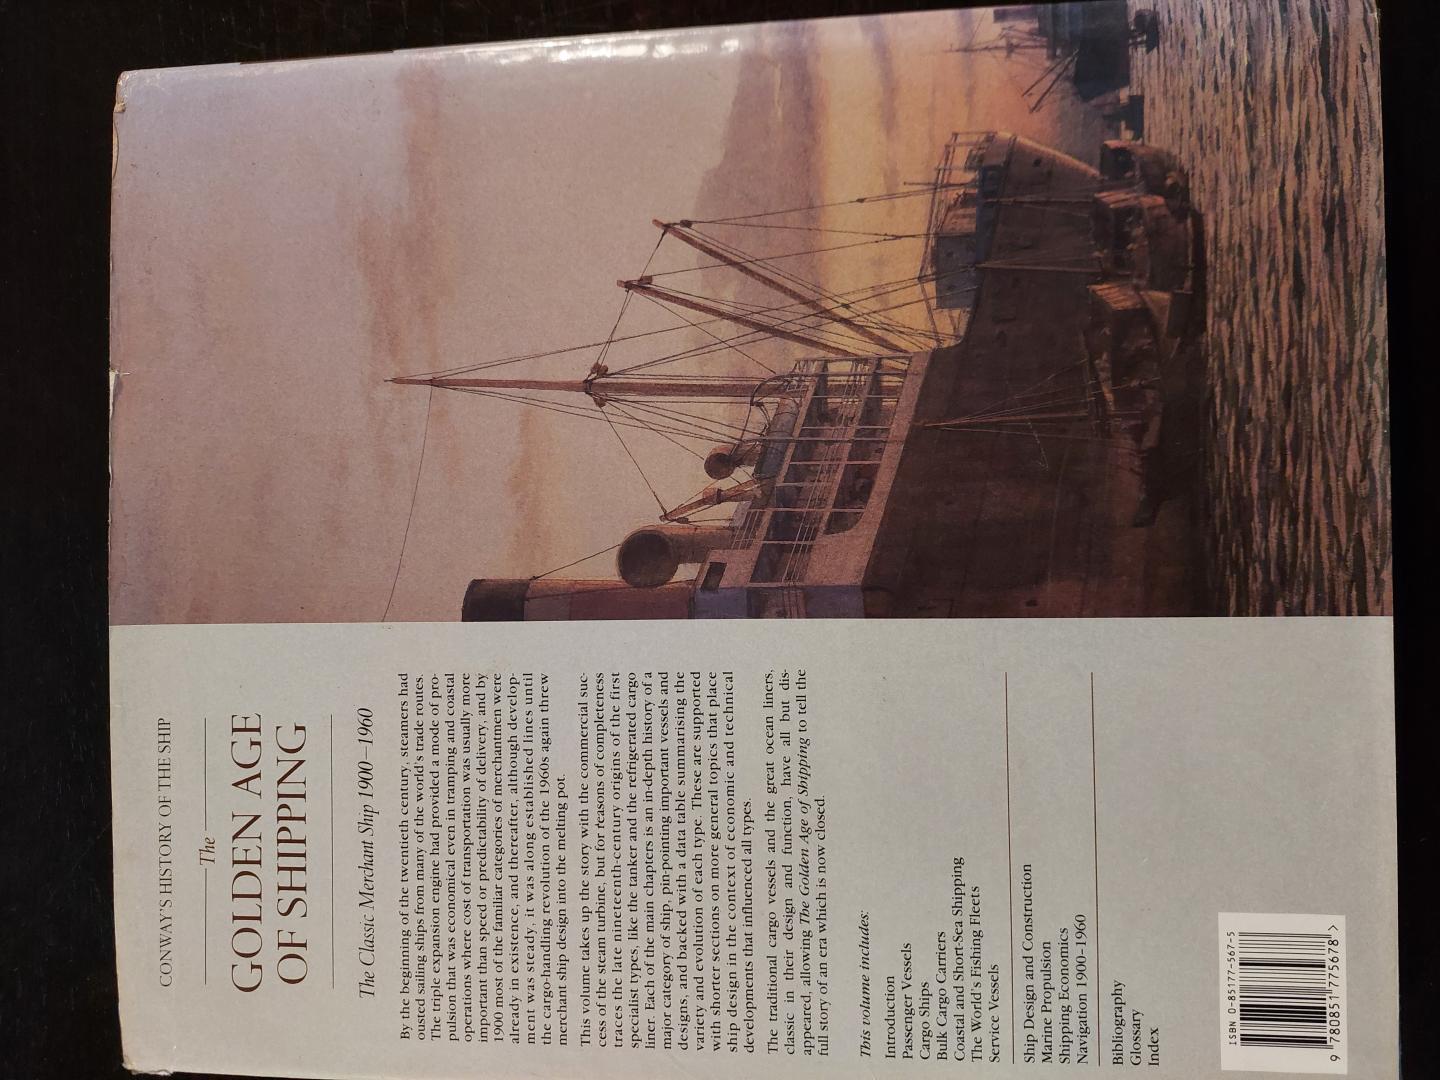 Gardiner, Robert ed. - The Golden age of shipping, the classic merchant ship 1900 - 1960, conway's history of the ship